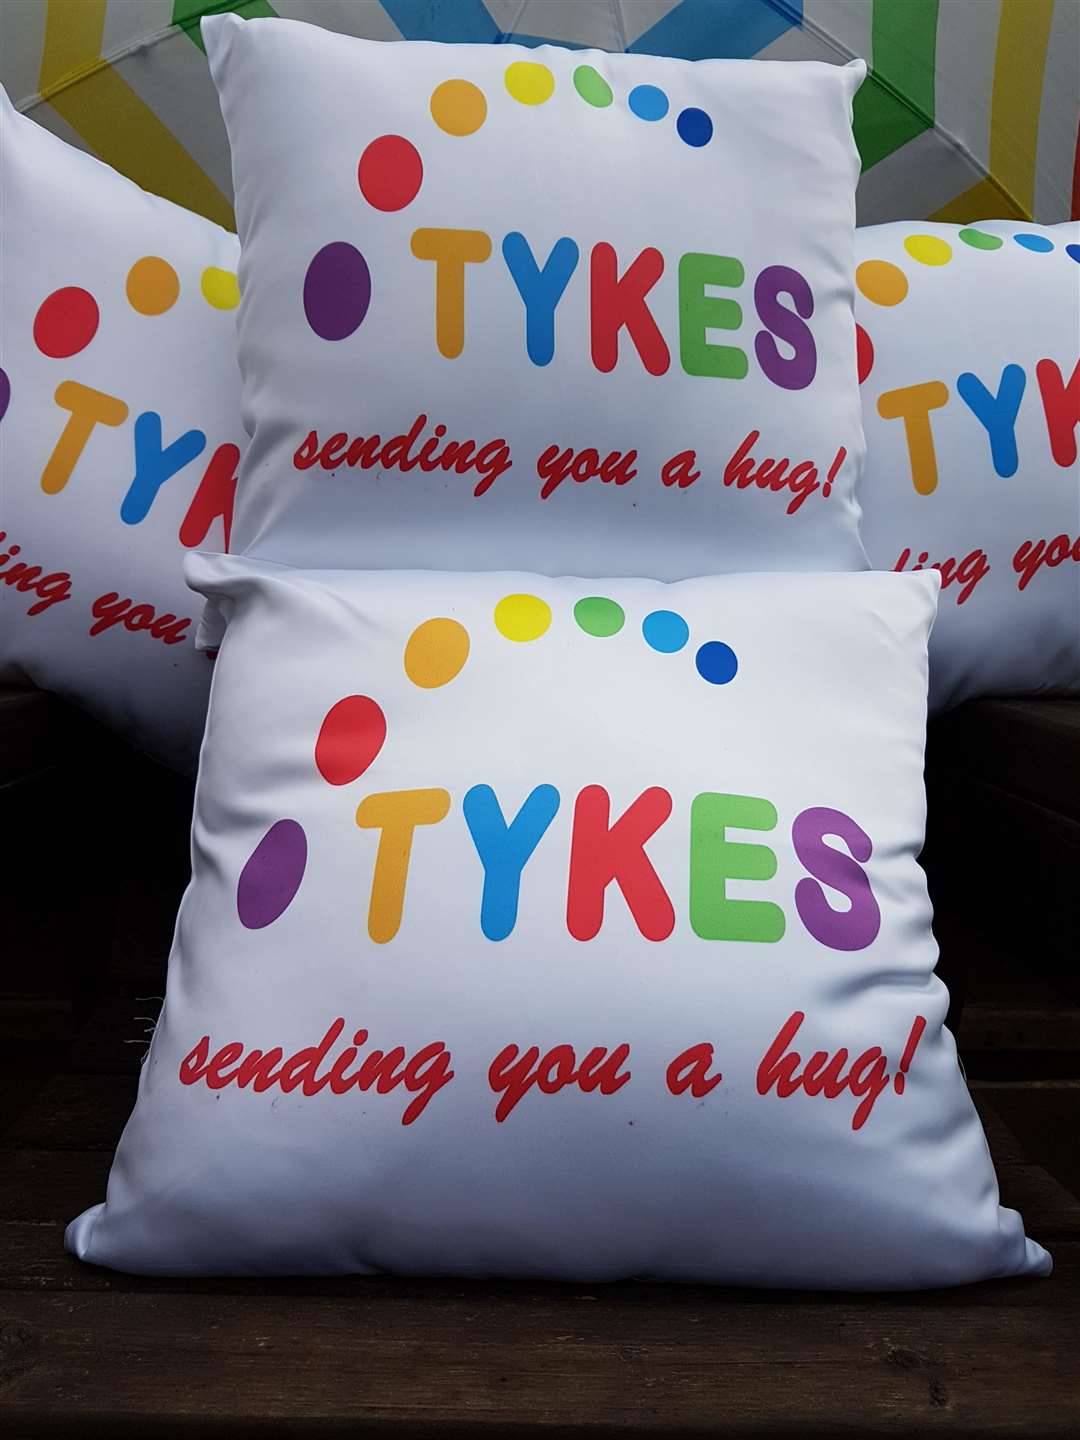 High Life Highland is to work in partnership with Tykes to introduce its new programme.